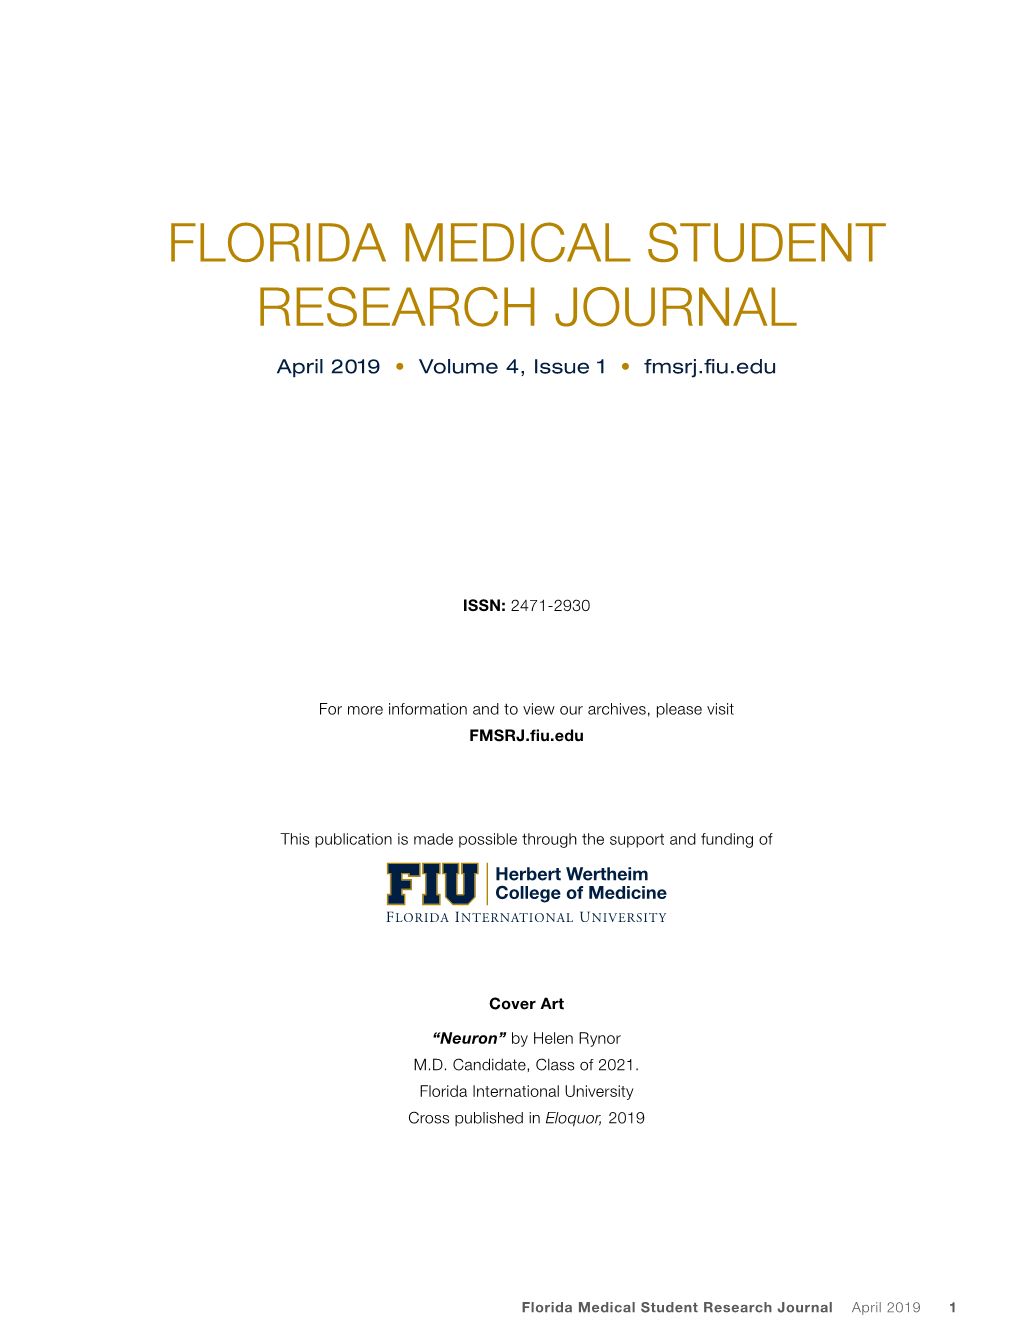 Florida Medical Student Research Journal